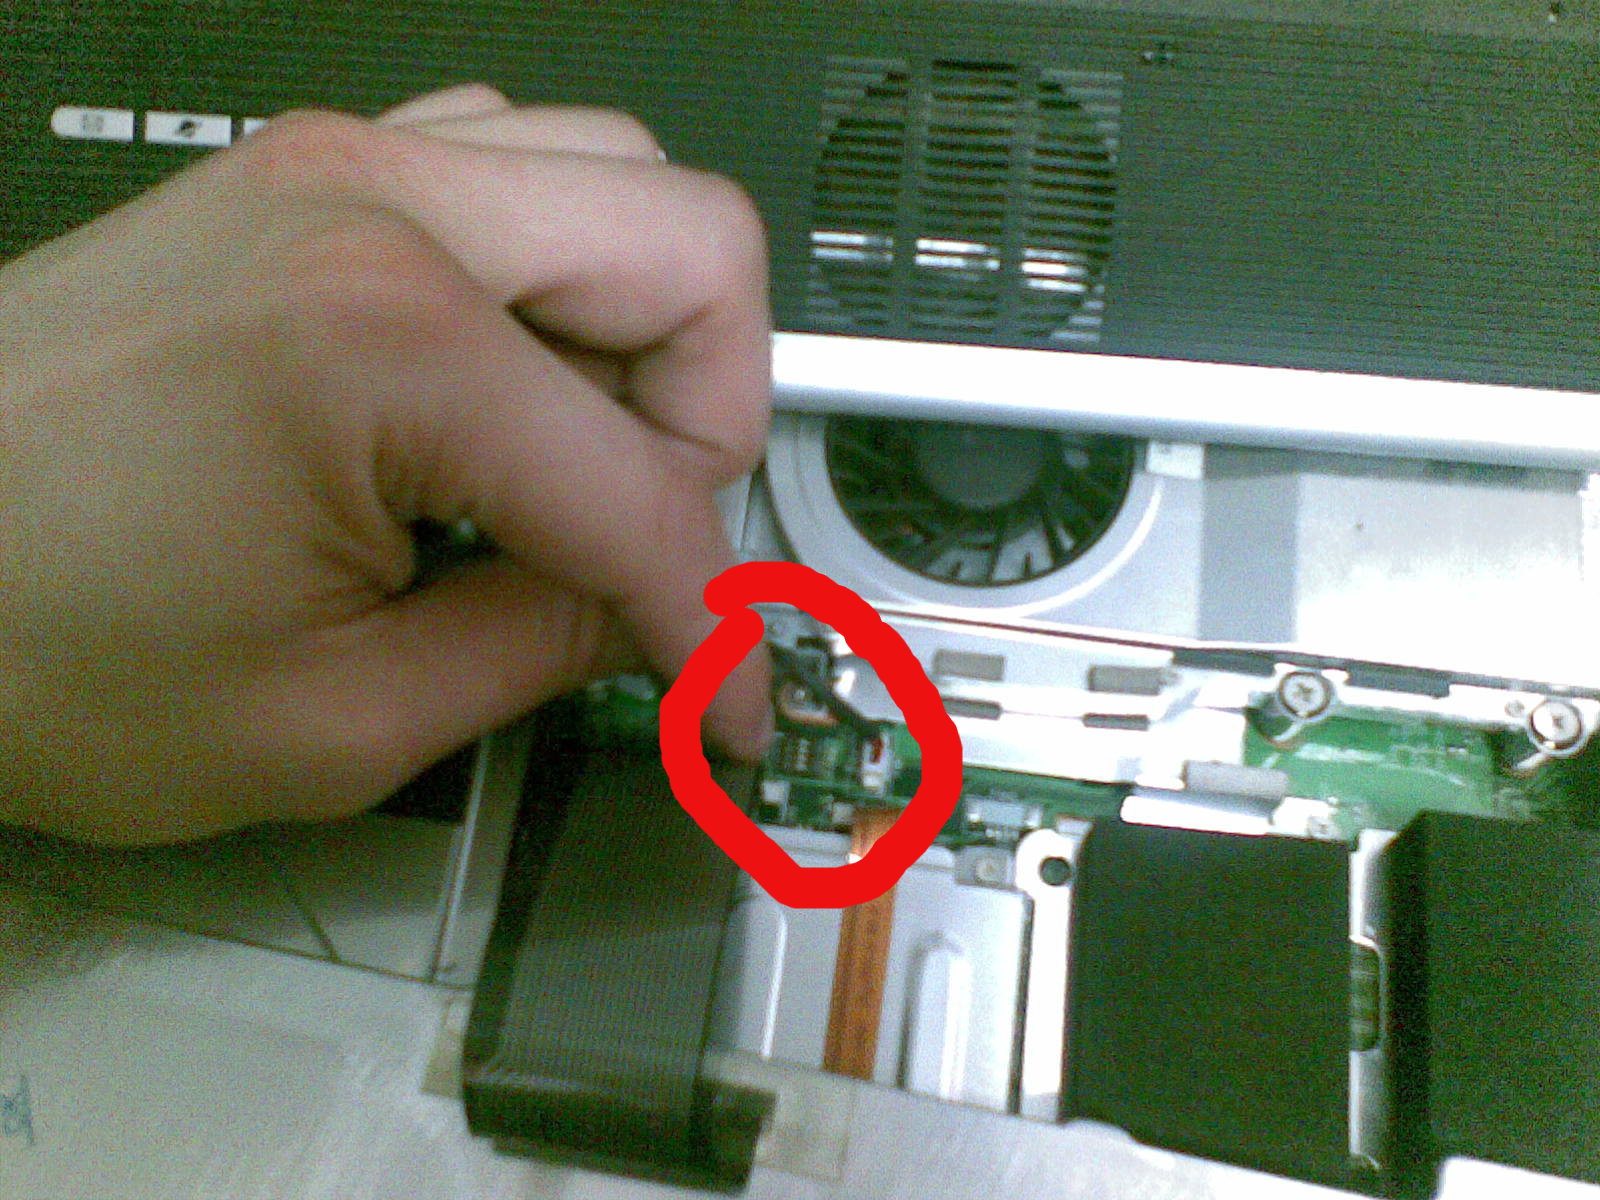 Removing Bios Hardware Password And Boot Block On Acer Aspire 1360 Sid What Is He On About Now